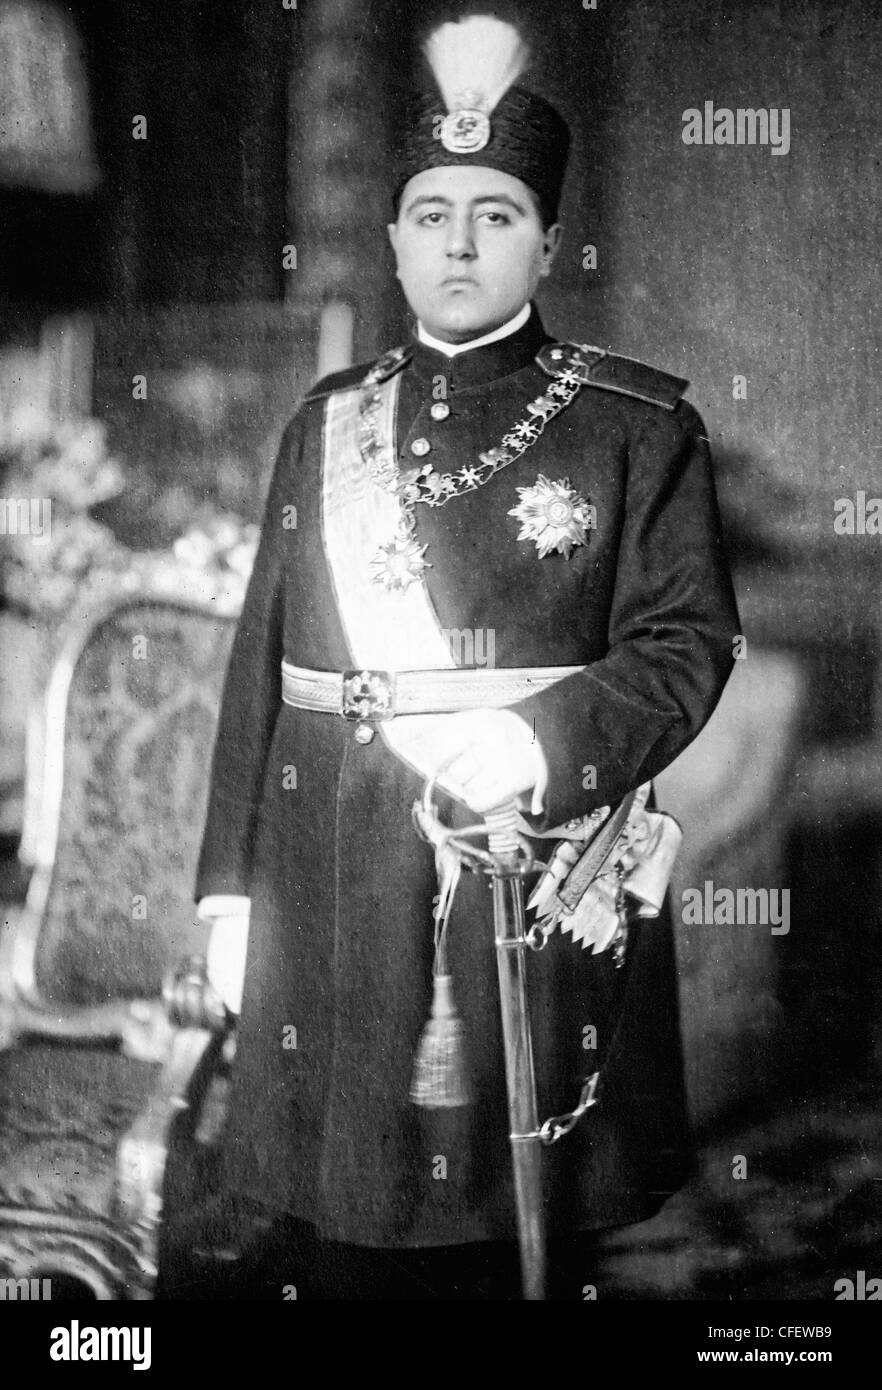 Ahmad Shah Qajar - Shah of Persia (Iran) from 1909 to 1925 and the last of the Qajar dynasty, circa 1920 Stock Photo